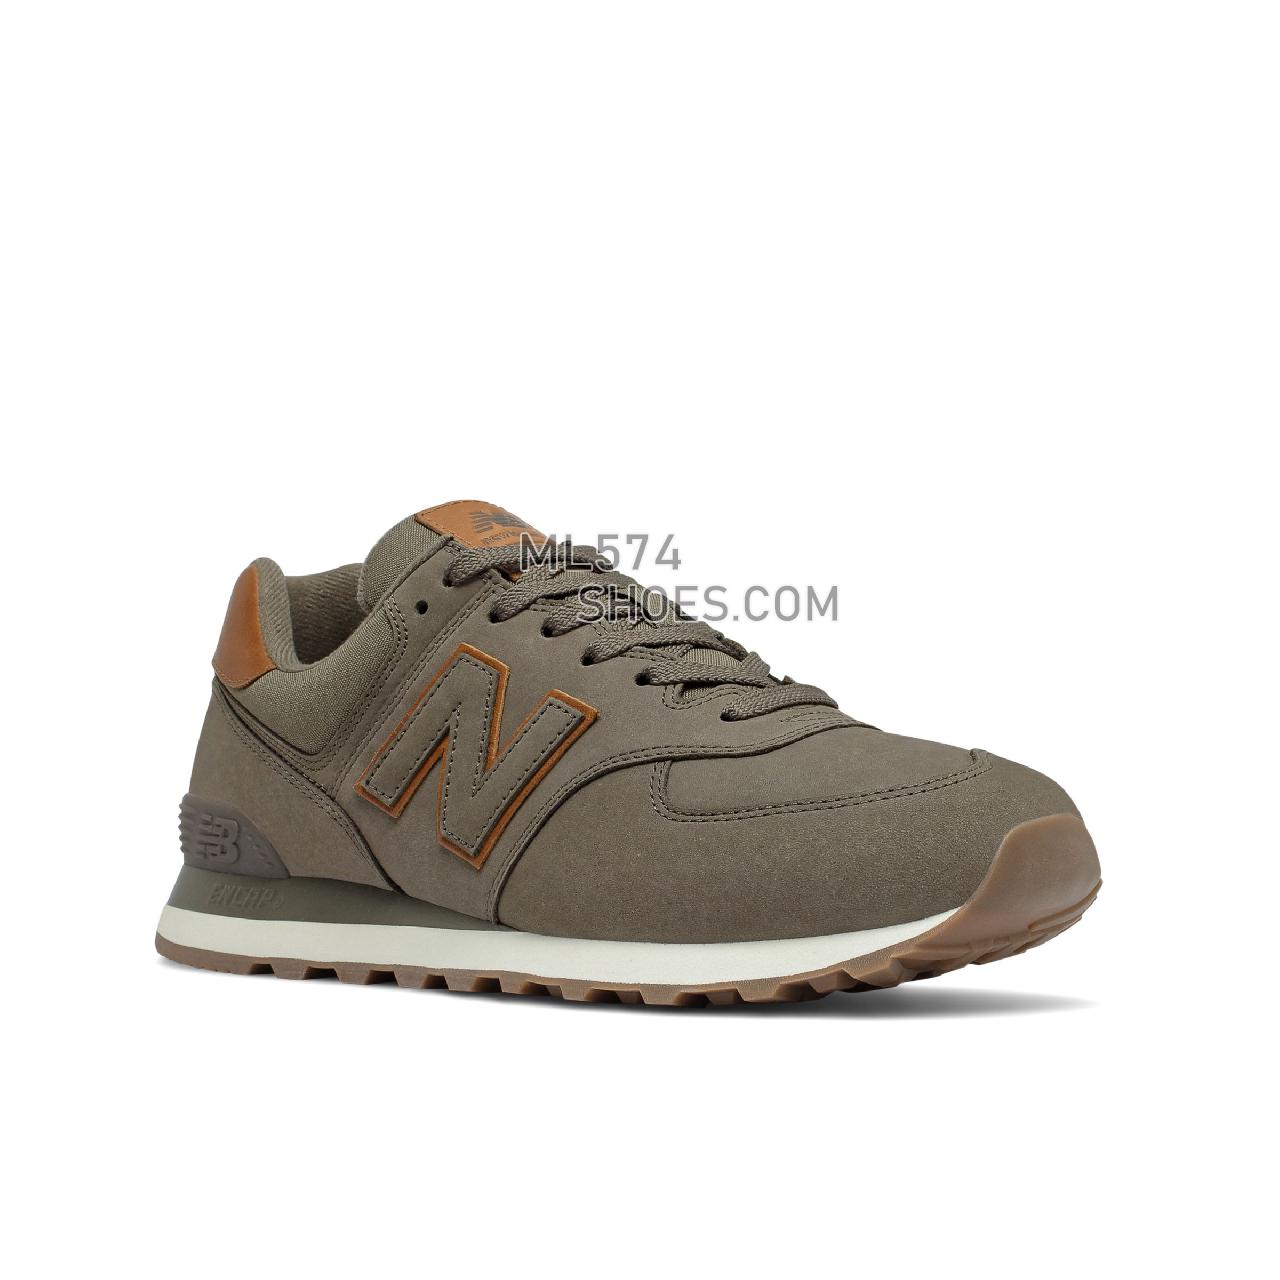 New Balance 574v2 - Men's Classic Sneakers - Wren with Tan and Sea Salt - ML574NW2